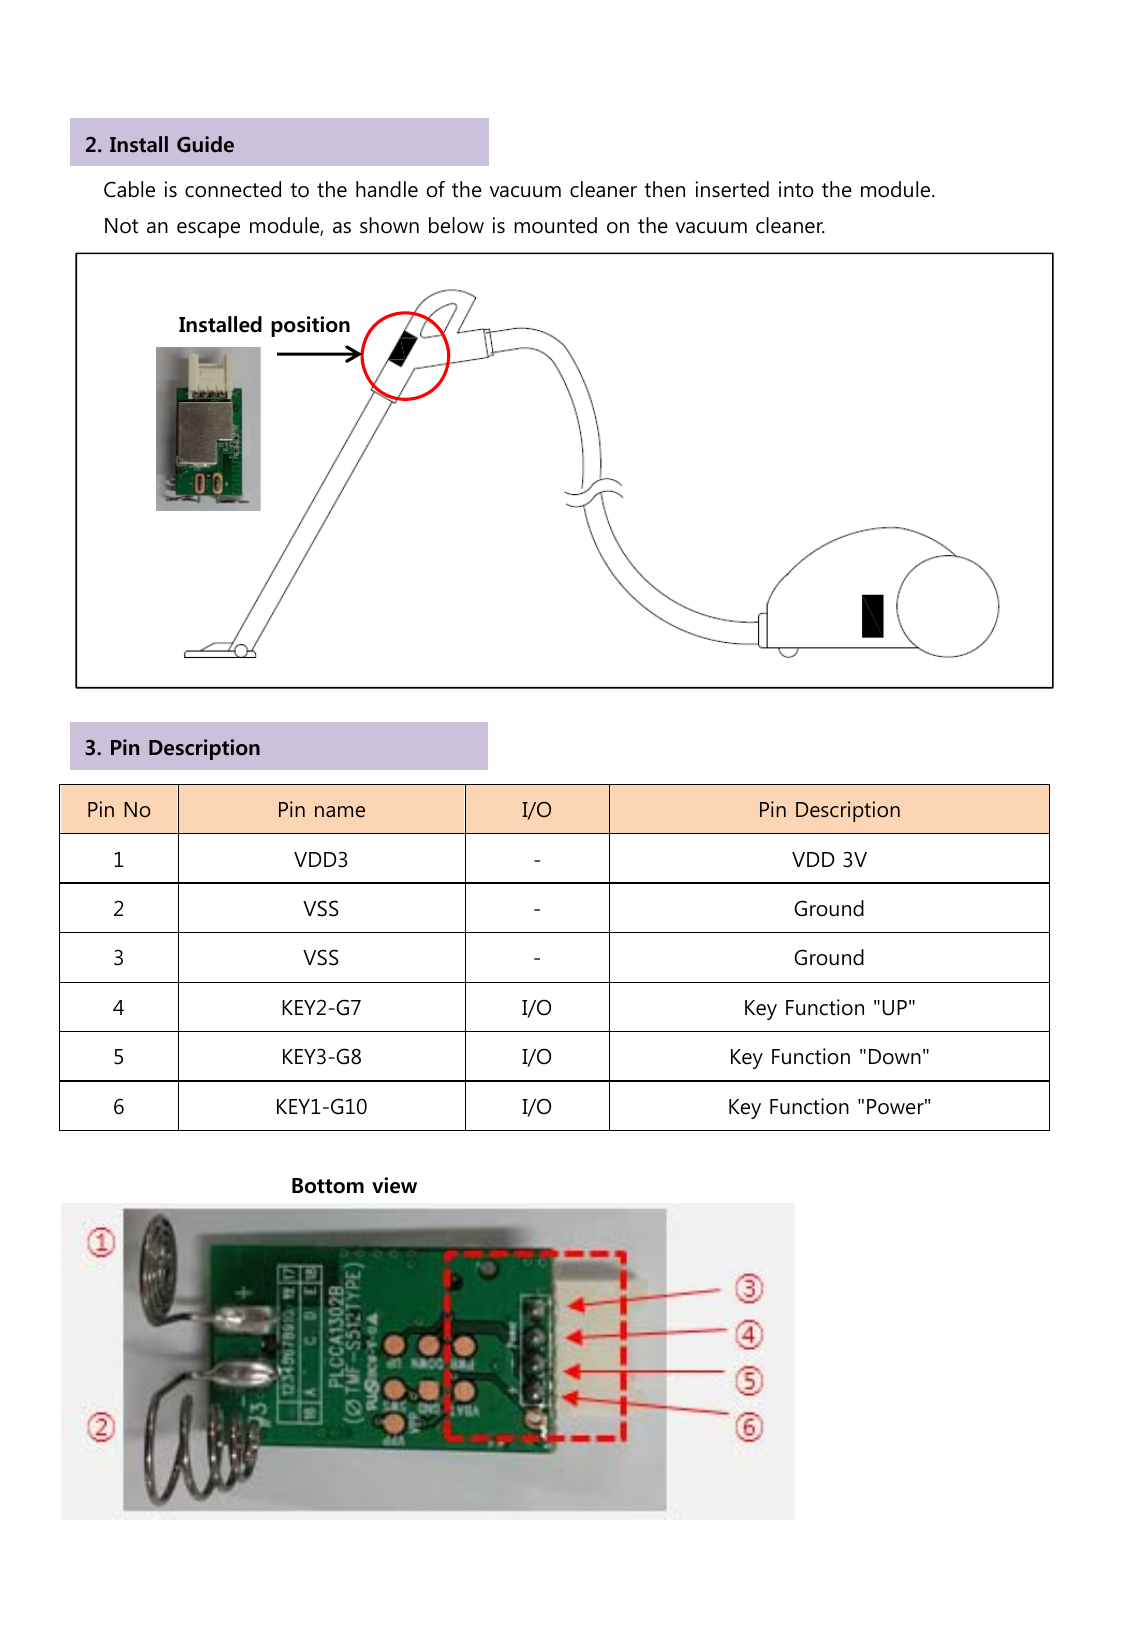           Cable is connected to the handle of the vacuum cleaner then inserted into the module.         Not an escape module, as shown below is mounted on the vacuum cleaner.                Pin No  Pin name  I/O  Pin Description 1  VDD3  -  VDD 3V 2  VSS  -  Ground 3  VSS  -  Ground 4  KEY2-G7  I/O  Key Function &quot;UP&quot; 5  KEY3-G8  I/O  Key Function &quot;Down&quot; 6  KEY1-G10  I/O  Key Function &quot;Power&quot;                        Bottom view  Installed position 2. Install Guide 3. Pin Description 